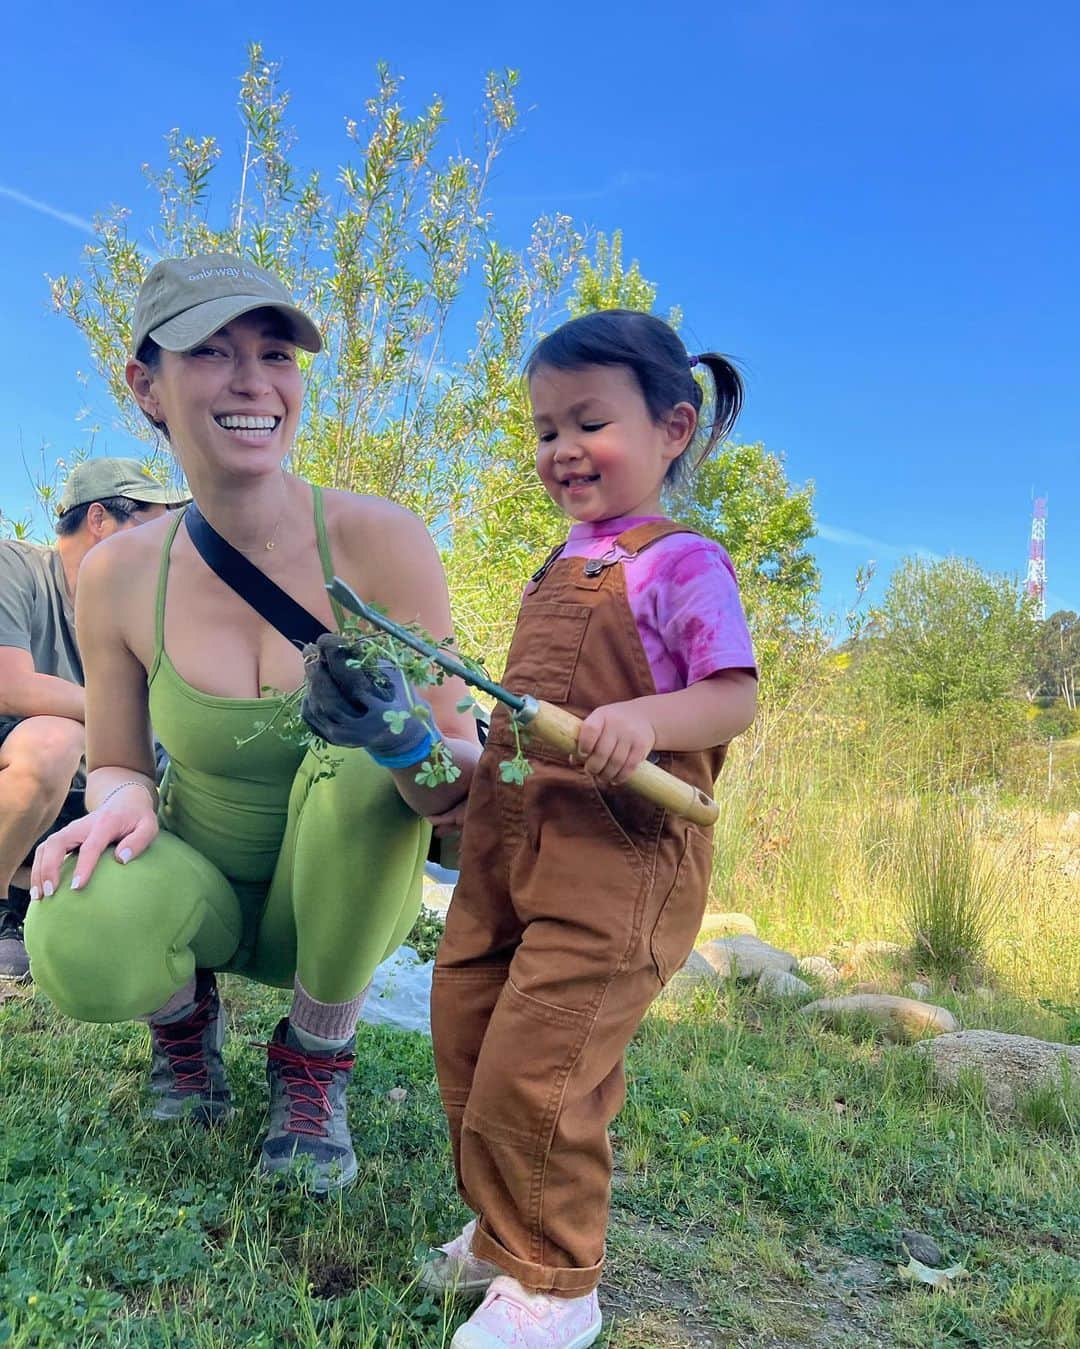 Livのインスタグラム：「Spent a great day with @calparks weeding before planting native milkweed for monarch butterflies #migration. As you know butterflies only lay eggs on #milkweed so this is a crucial step to securing their future🦋🌍 Looking forward to returning and providing more land stewardship with Lyla #calparksearthday #calparks #milkweedformonarchs @calparks」